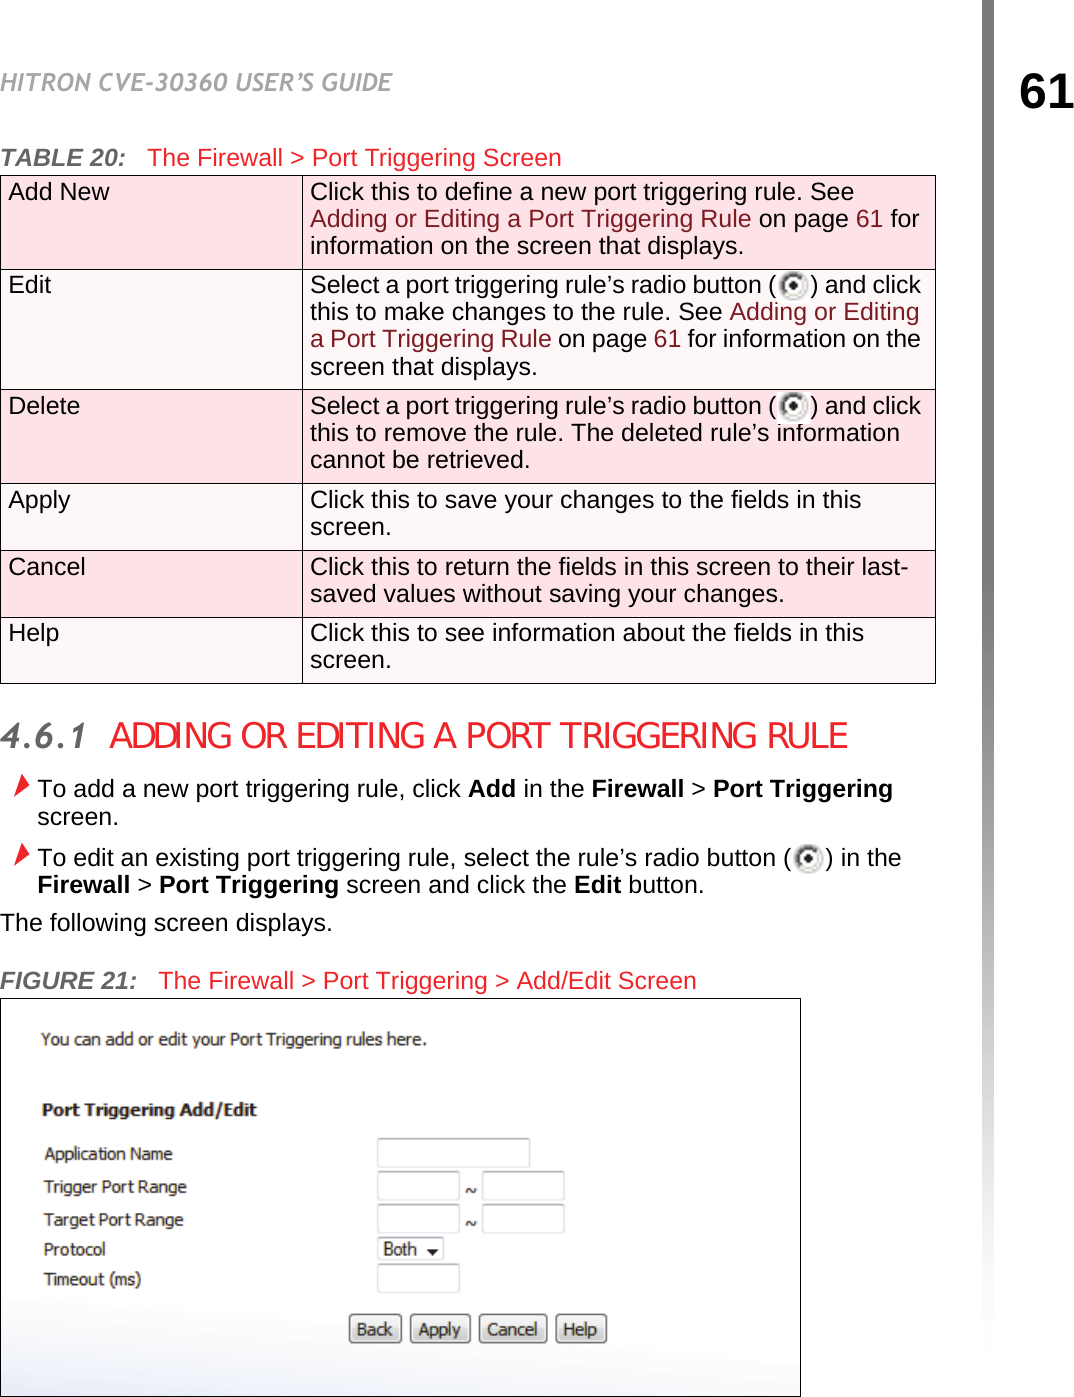 61HITRON CVE-30360 USER’S GUIDEFIREWALL4.6.1  ADDING OR EDITING A PORT TRIGGERING RULETo add a new port triggering rule, click Add in the Firewall &gt; Port Triggering screen.To edit an existing port triggering rule, select the rule’s radio button ( ) in the Firewall &gt; Port Triggering screen and click the Edit button.The following screen displays.FIGURE 21:   The Firewall &gt; Port Triggering &gt; Add/Edit ScreenAdd New Click this to define a new port triggering rule. See Adding or Editing a Port Triggering Rule on page 61 for information on the screen that displays.Edit Select a port triggering rule’s radio button ( ) and click this to make changes to the rule. See Adding or Editing a Port Triggering Rule on page 61 for information on the screen that displays.Delete Select a port triggering rule’s radio button ( ) and click this to remove the rule. The deleted rule’s information cannot be retrieved.Apply Click this to save your changes to the fields in this screen.Cancel Click this to return the fields in this screen to their last-saved values without saving your changes.Help Click this to see information about the fields in this screen.TABLE 20:   The Firewall &gt; Port Triggering Screen